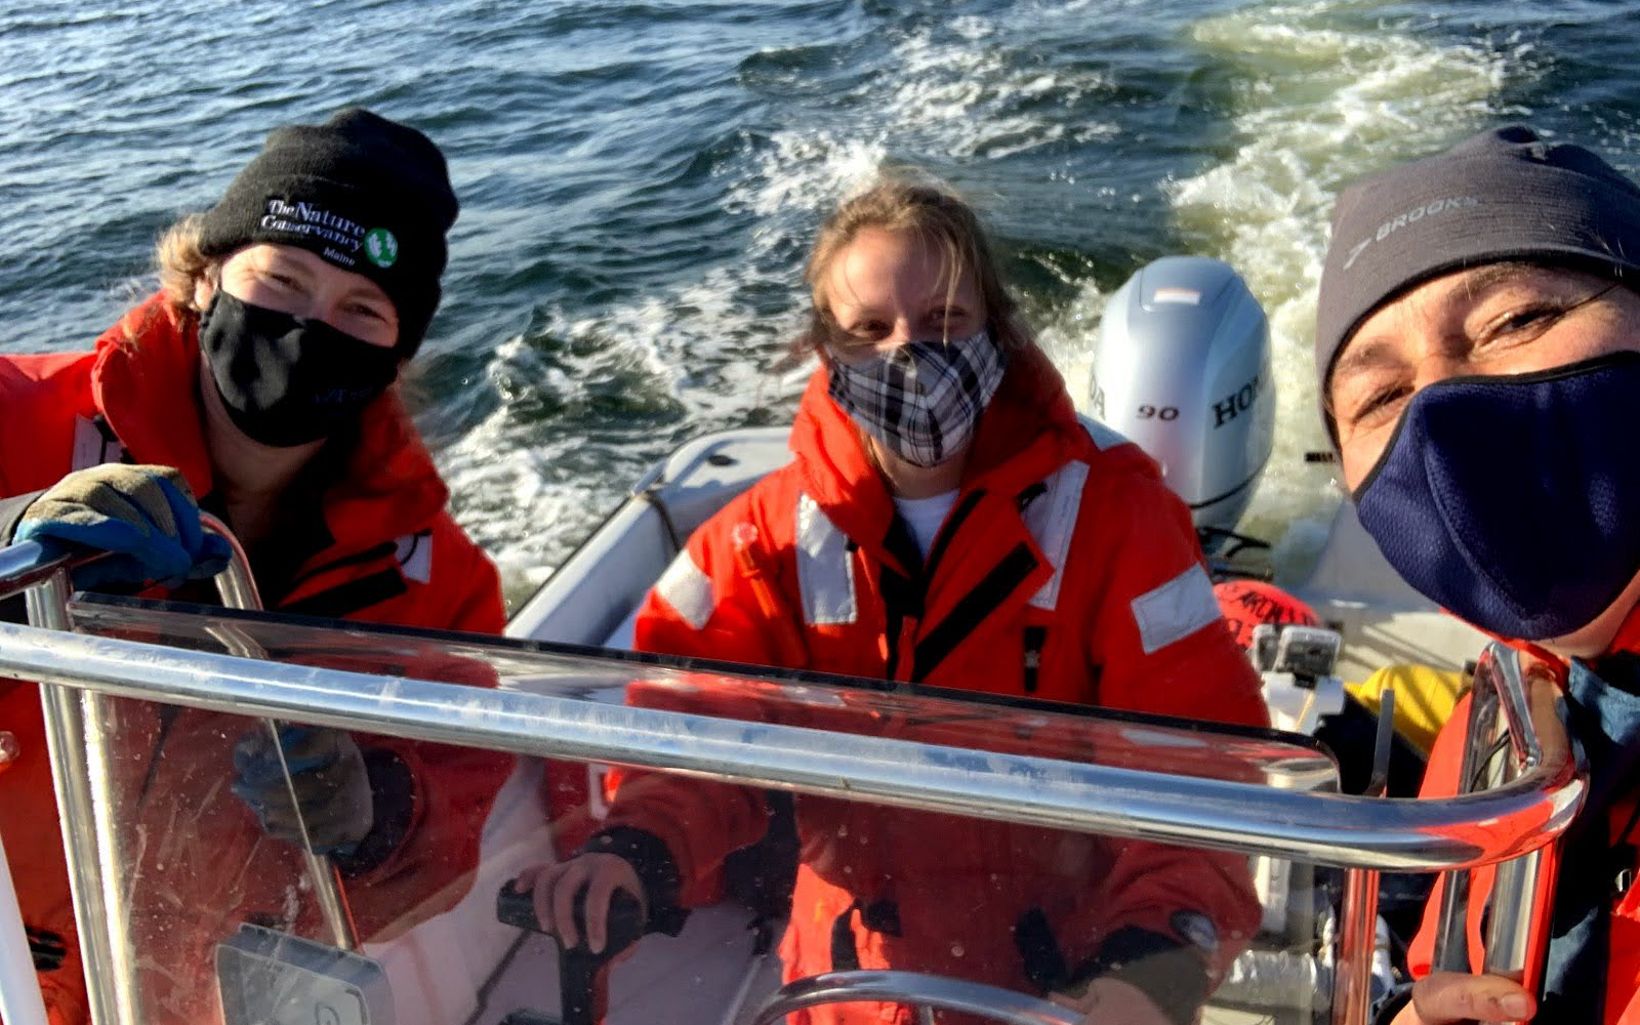 Three women in dry suites stand in a moving motor boat.